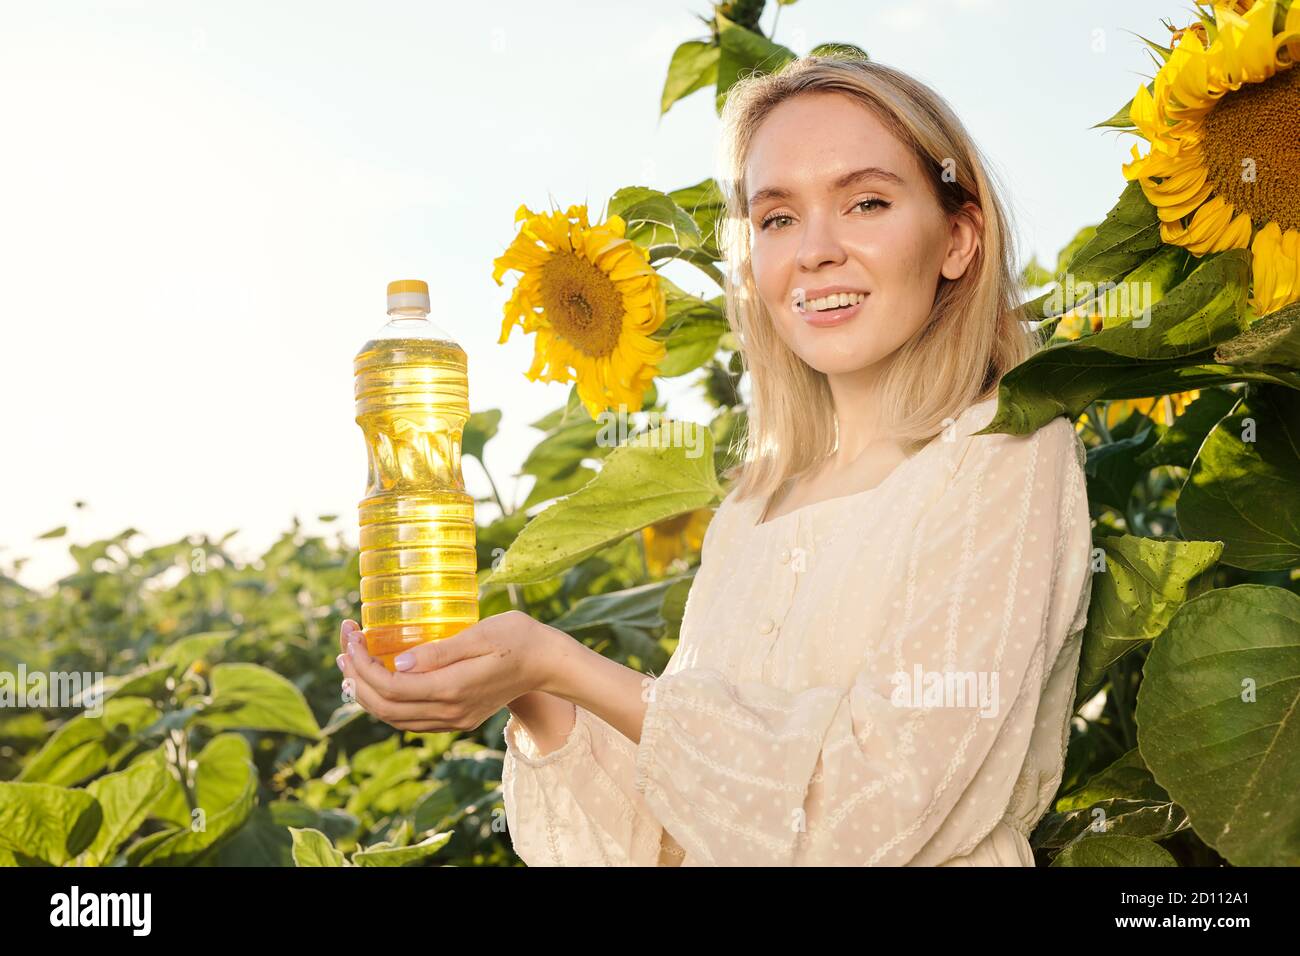 Smiling blond young woman in white dress holding bottle of sunflower oil Stock Photo